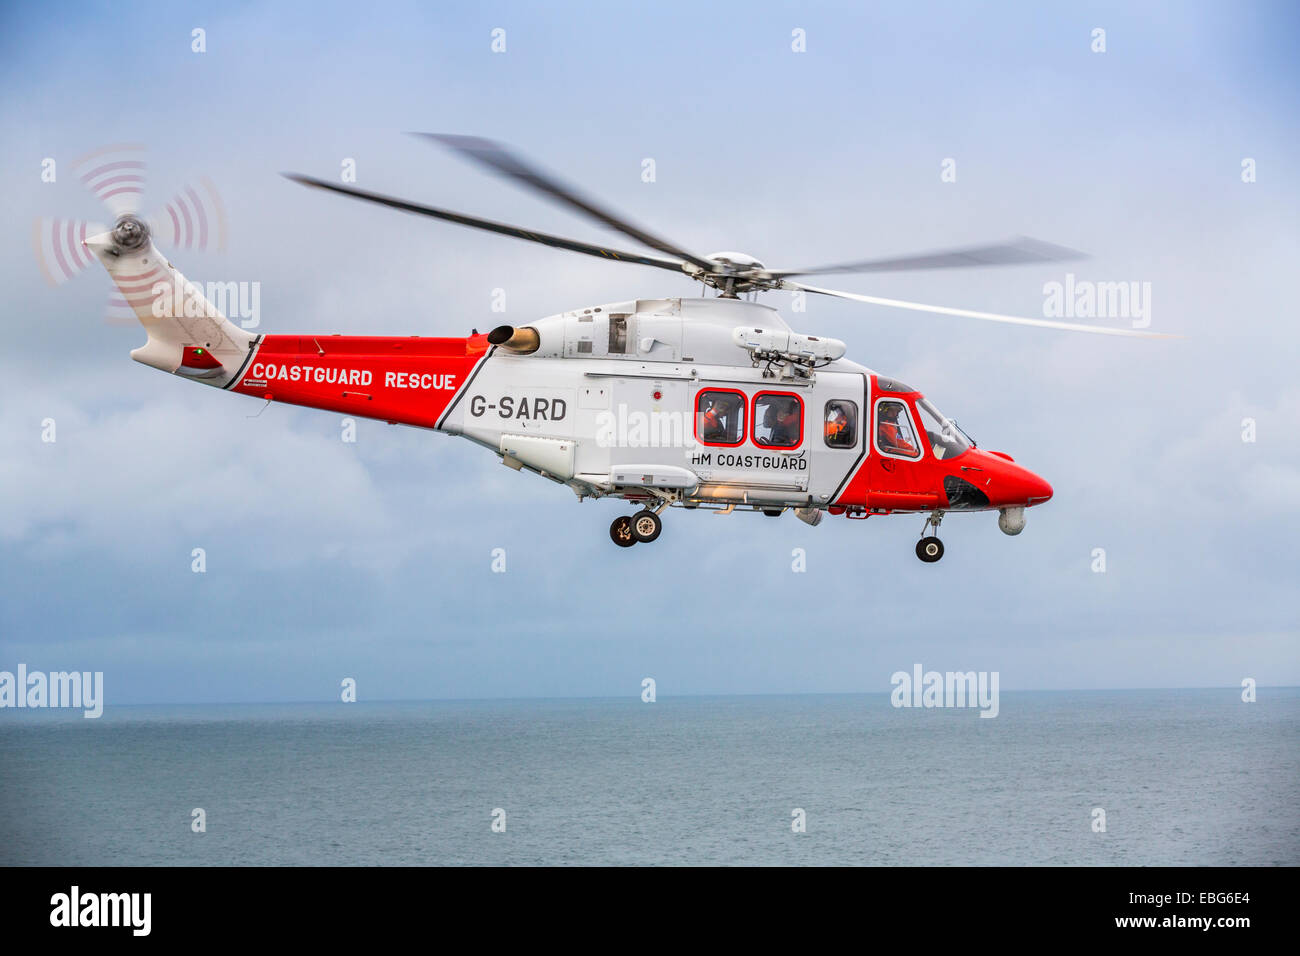 A view of an Augusta HM Coastguard Search and Rescue helicopter English Channel UK Stock Photo